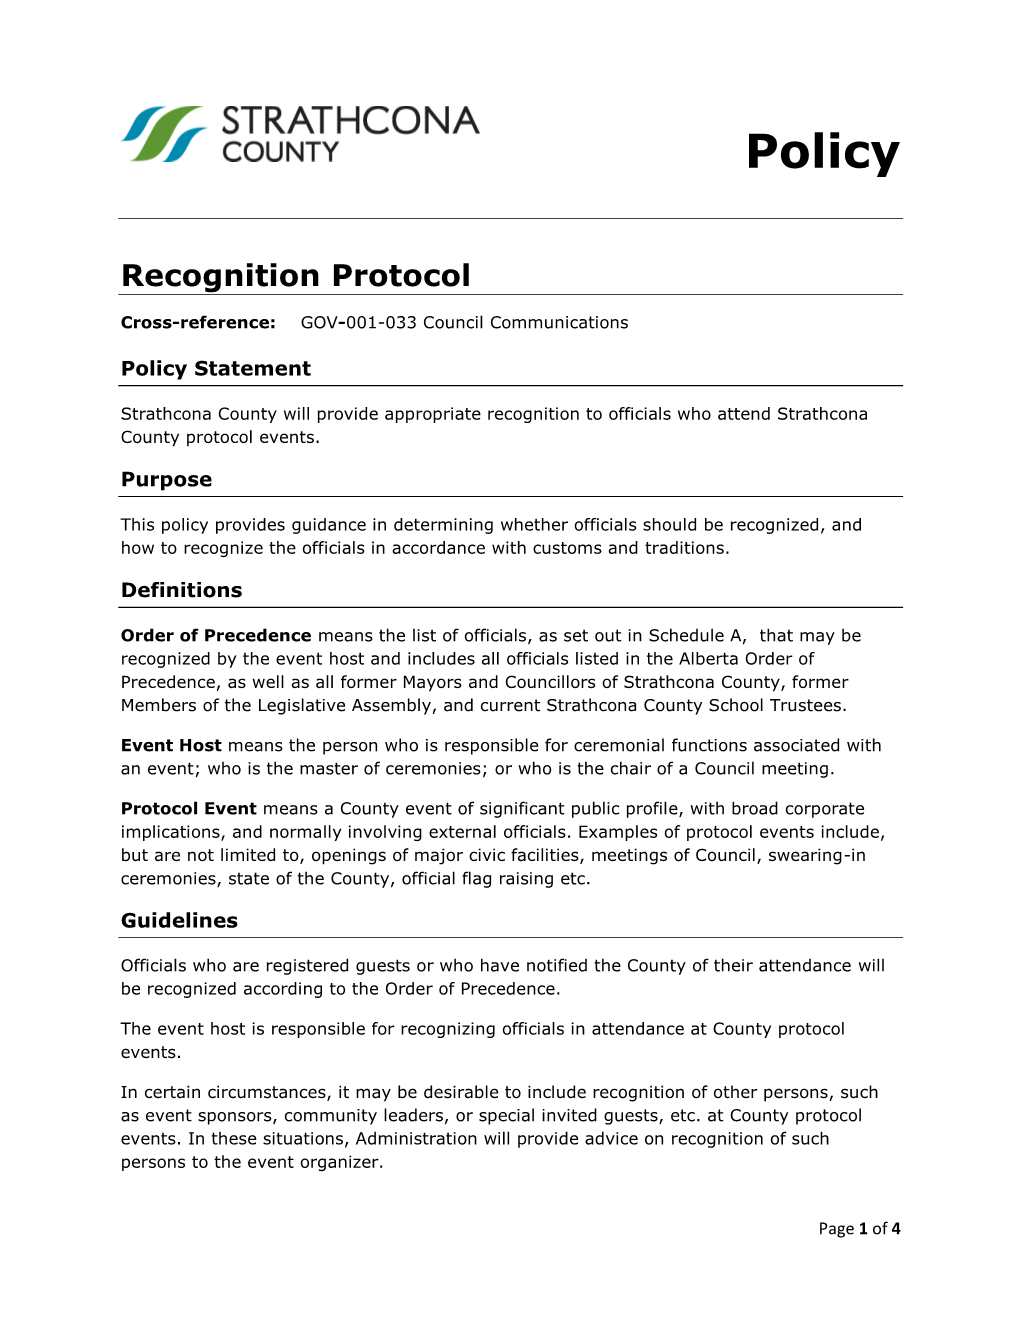 At-Lls-Mph-GOV-001-035 Recognition Protocol Policy.Docx